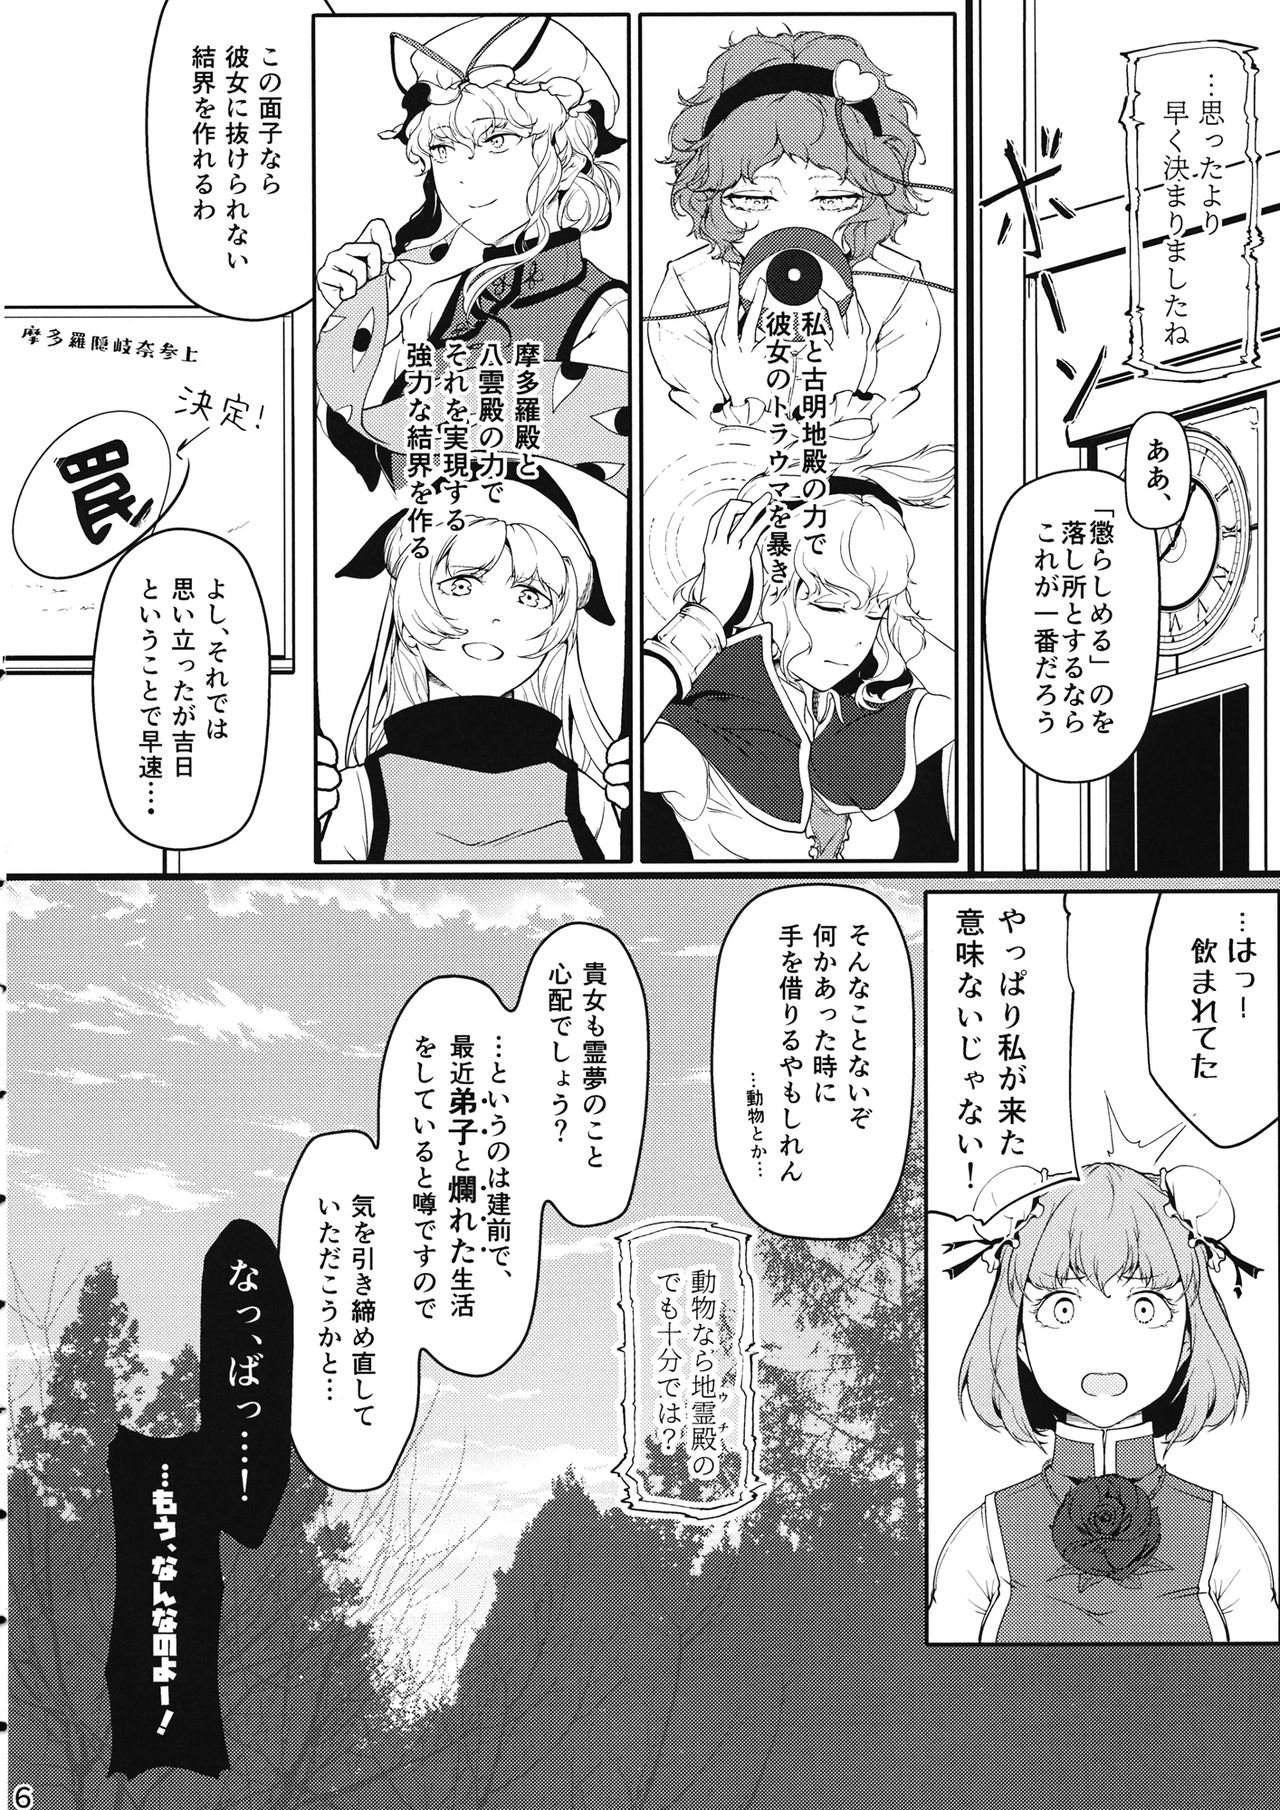 (C97) [Flying Bear (Hiyou)] Reverse Damage (Touhou Project) page 5 full